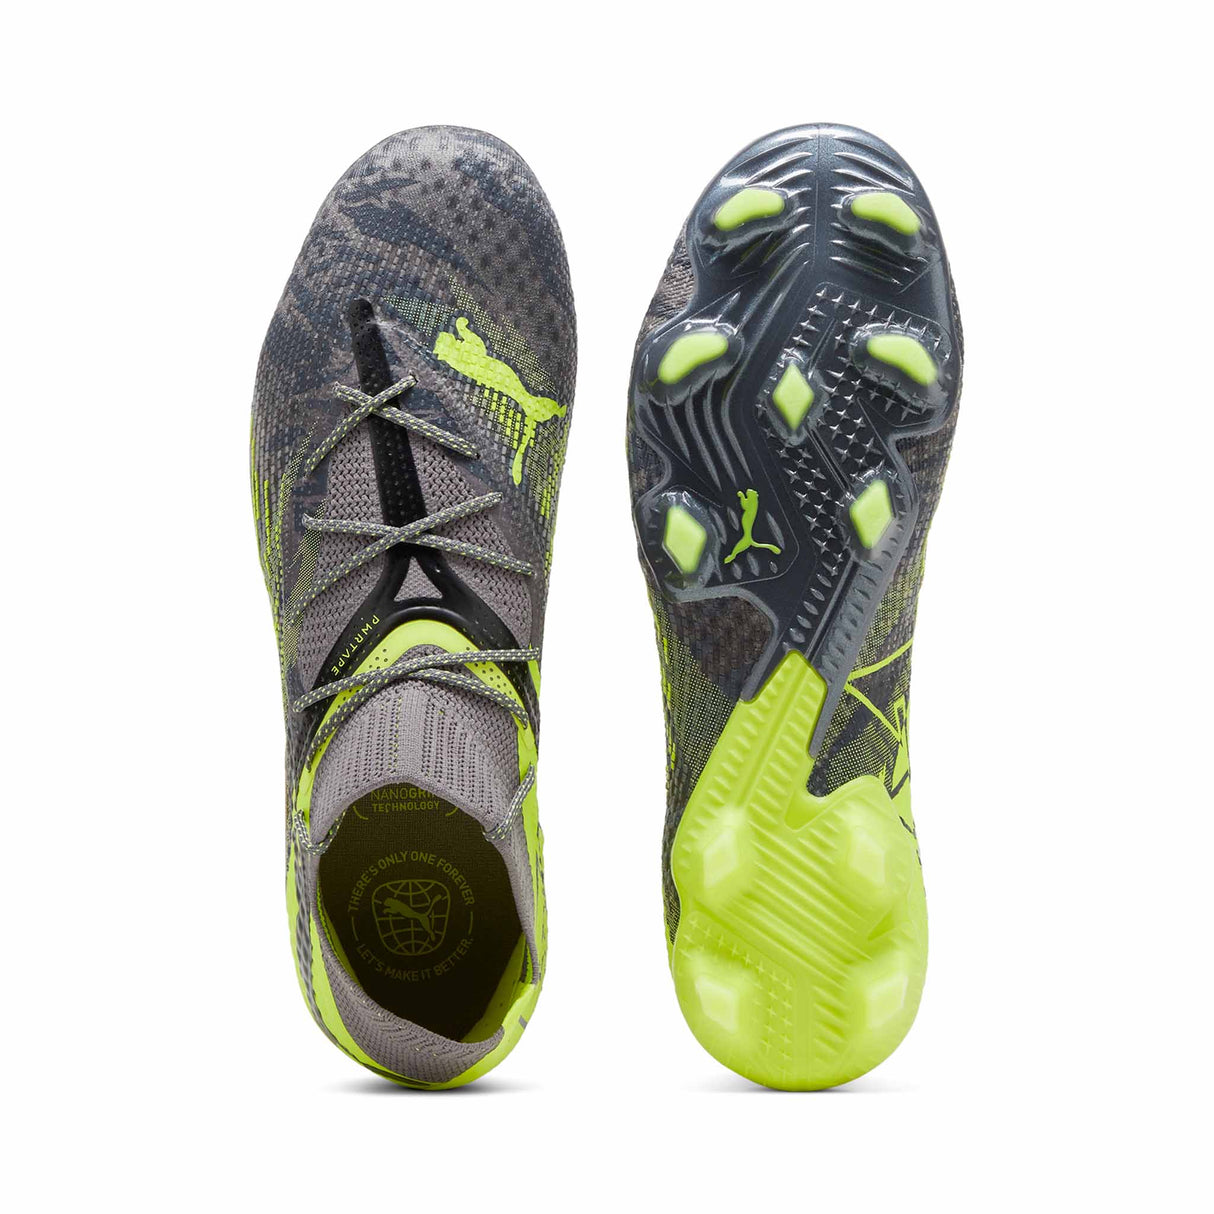 Puma Future 7 Ultimate Rush FG/AG chaussures de soccer à crampons - Strong Gray / Cool Dark Gray / Electric Lime